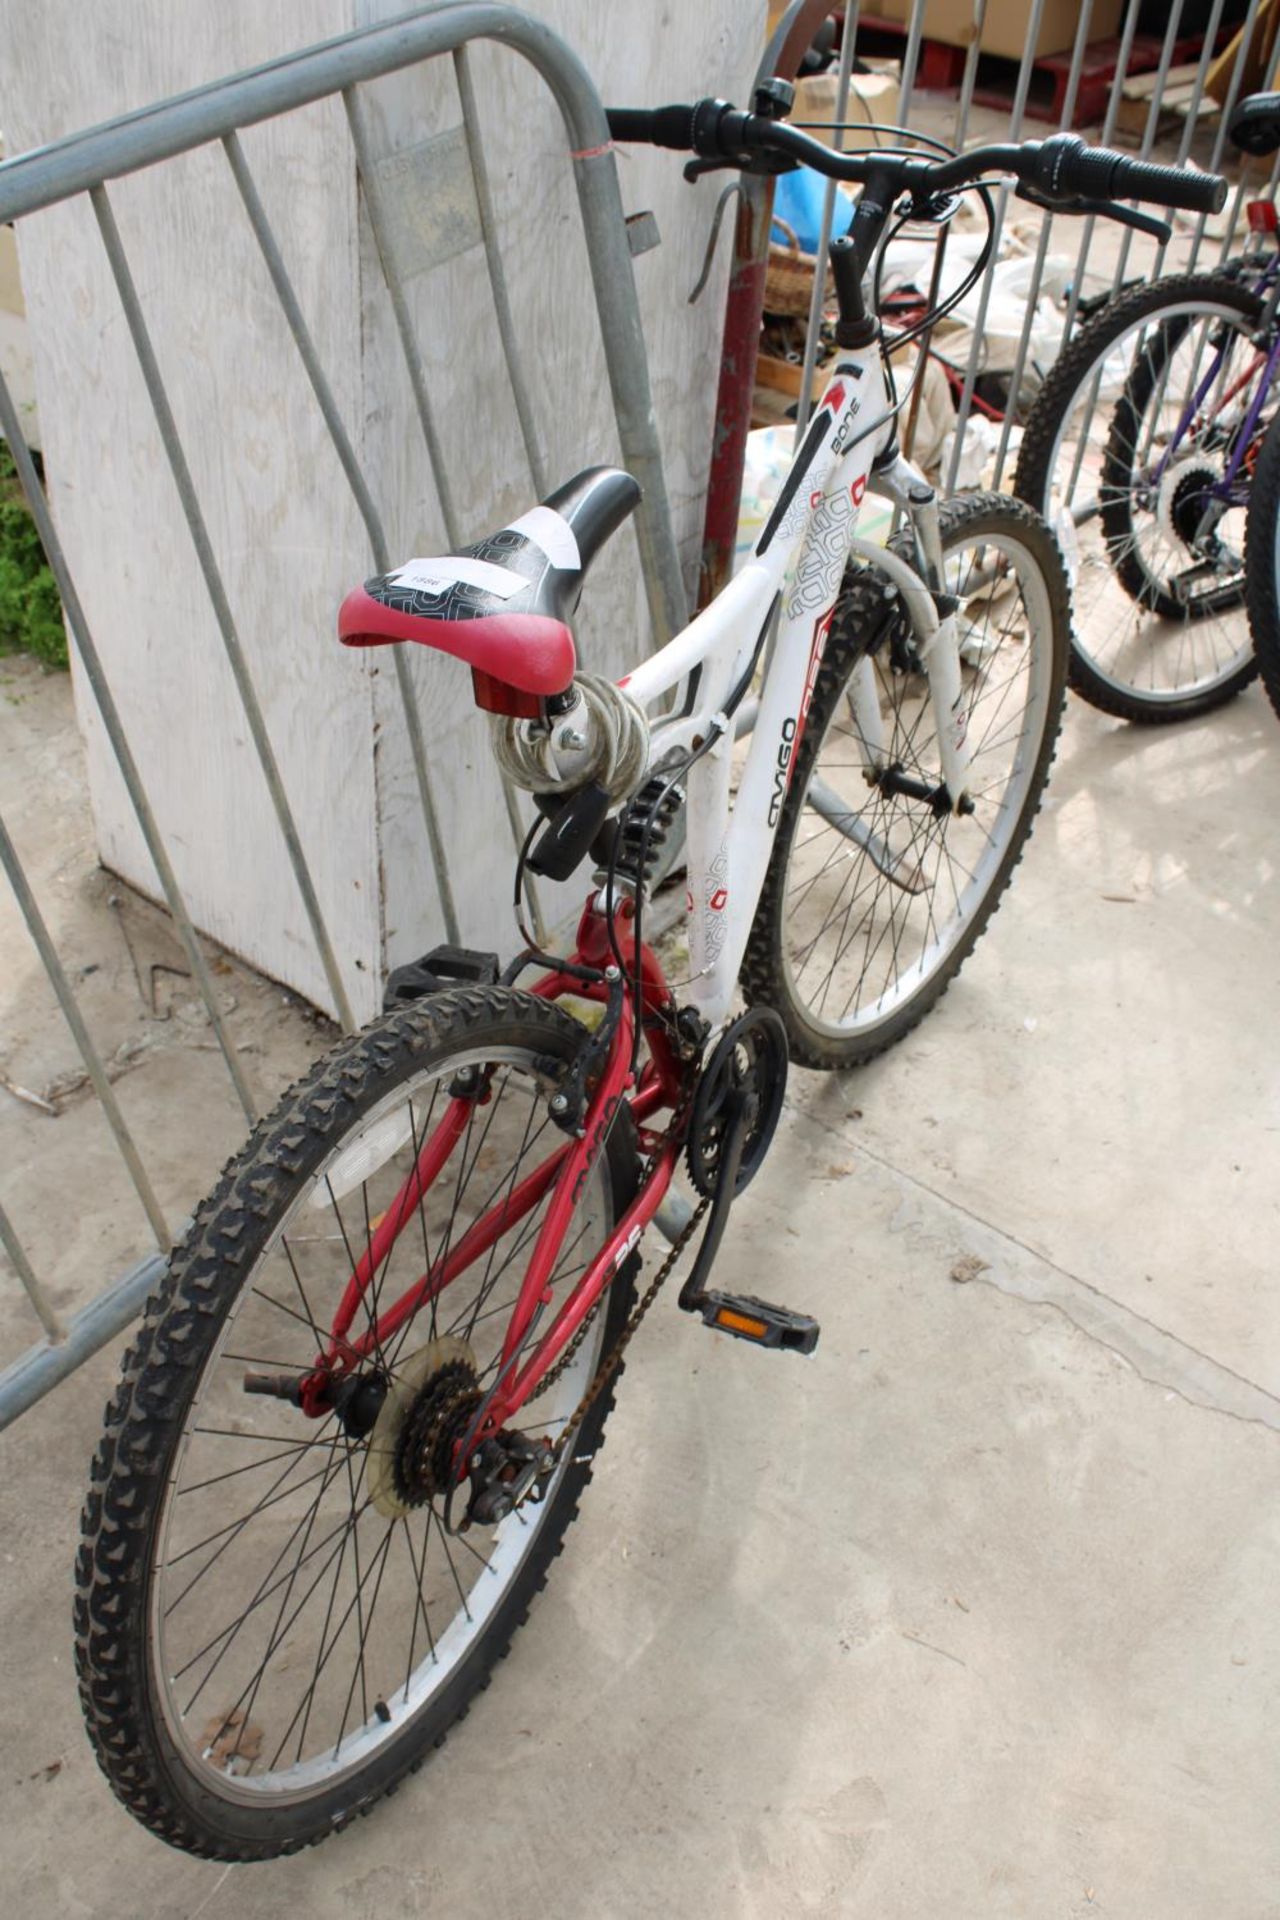 A GENTS MOUNTAIN BIKE WITH FRONT AND REAR SUSPENSION AND 12 SPEED GEAR SYSTEM - Image 2 of 3